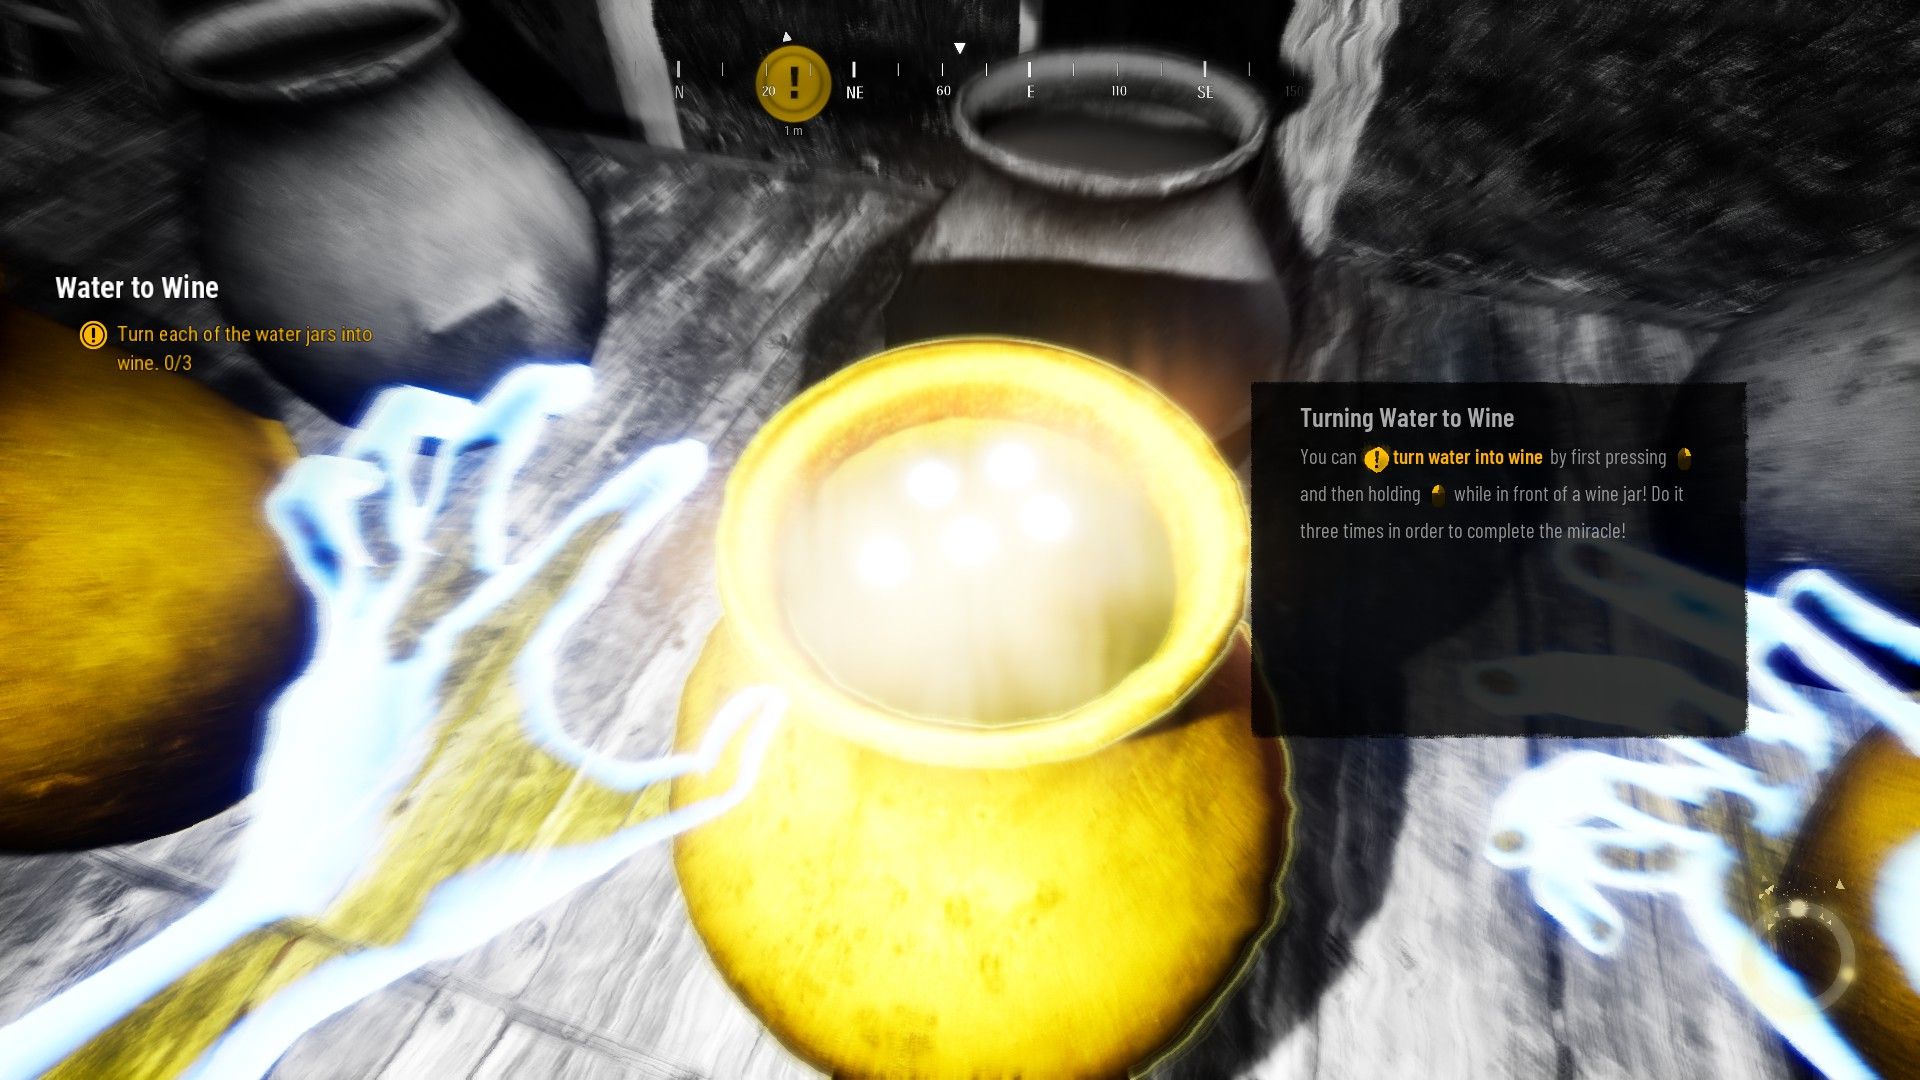 Video game screenshot of a man's hands over jars of water. Text prompts invite the player to press a button to turn the water into wine